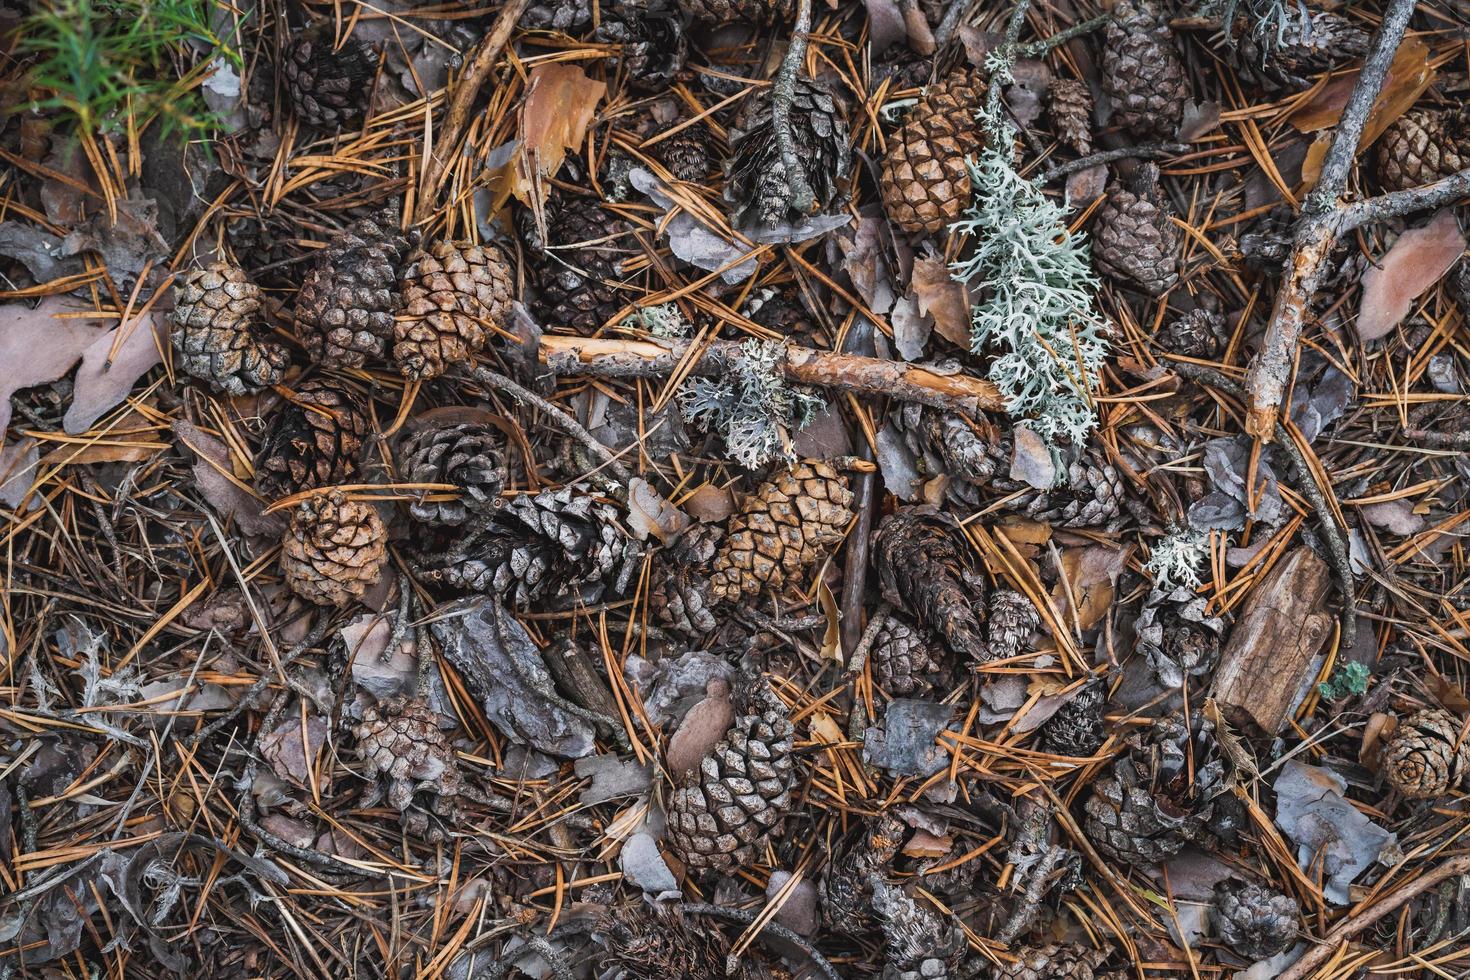 A picture of pinecones, twigs, pebbles, leaves and bark all over a forest floor